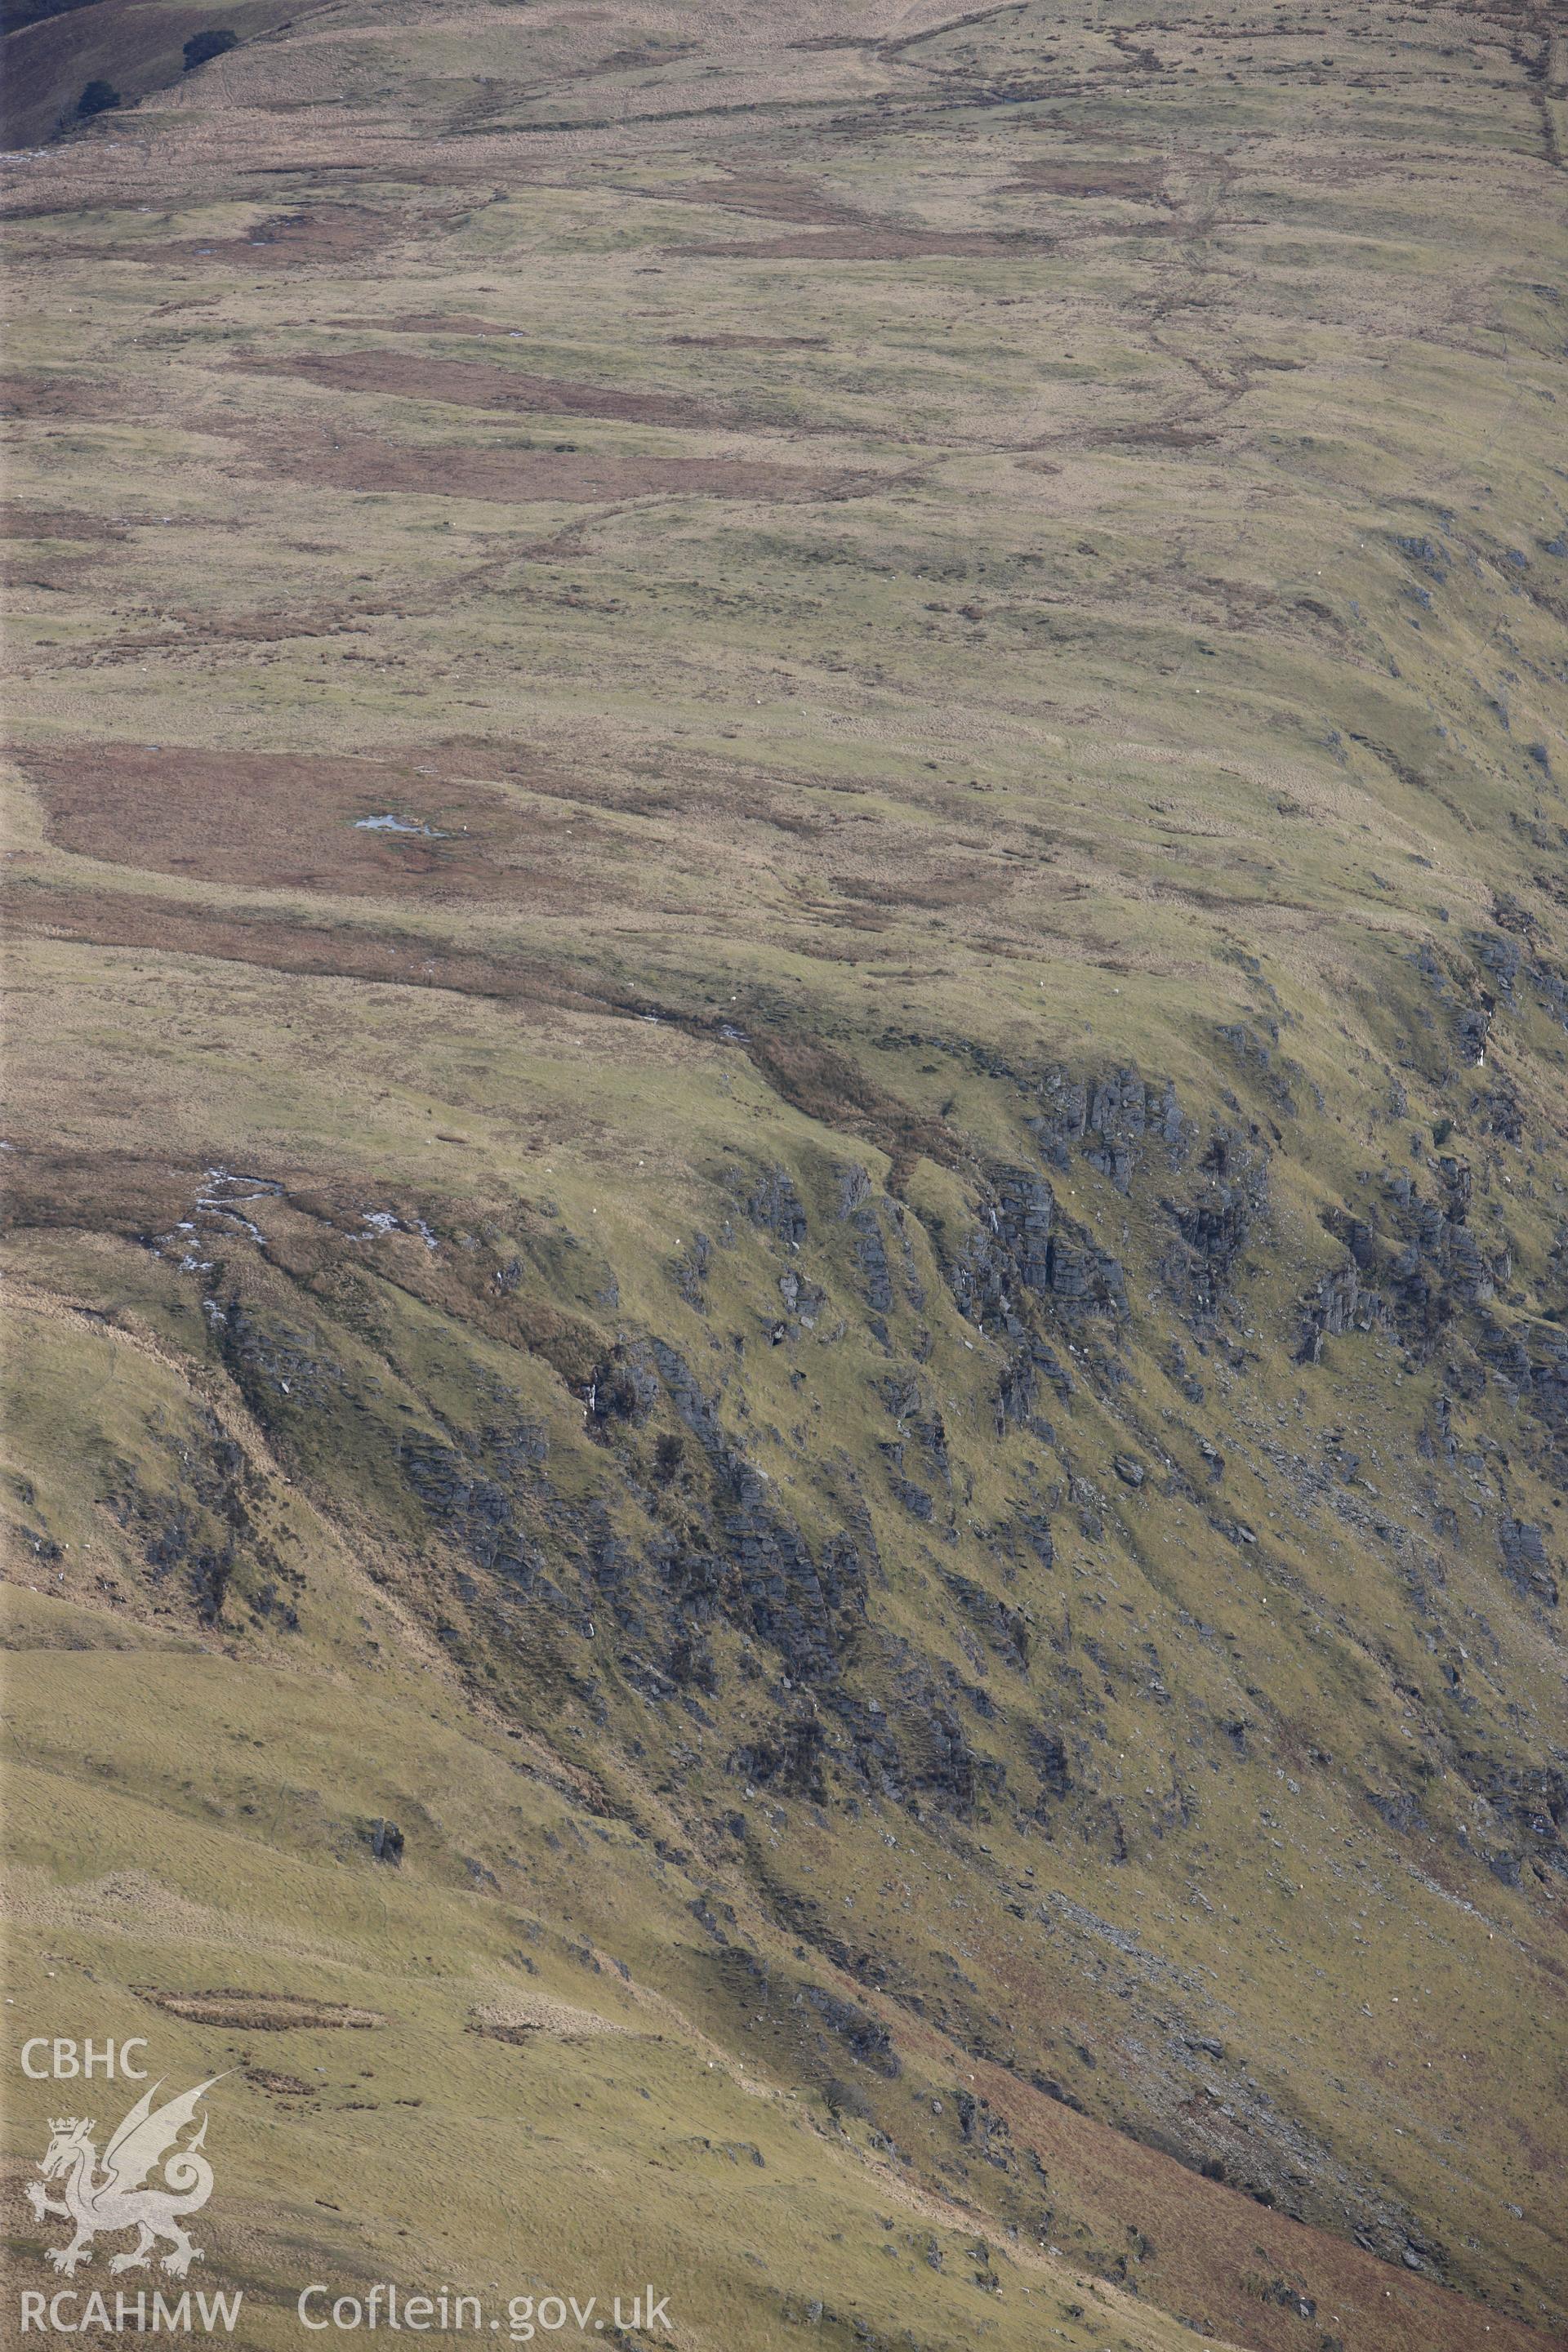 Esgair Irfon cairn in the Cambrian Mountains, north west of Llangurig. Oblique aerial photograph taken during the Royal Commission?s programme of archaeological aerial reconnaissance by Toby Driver on 28th February 2013.